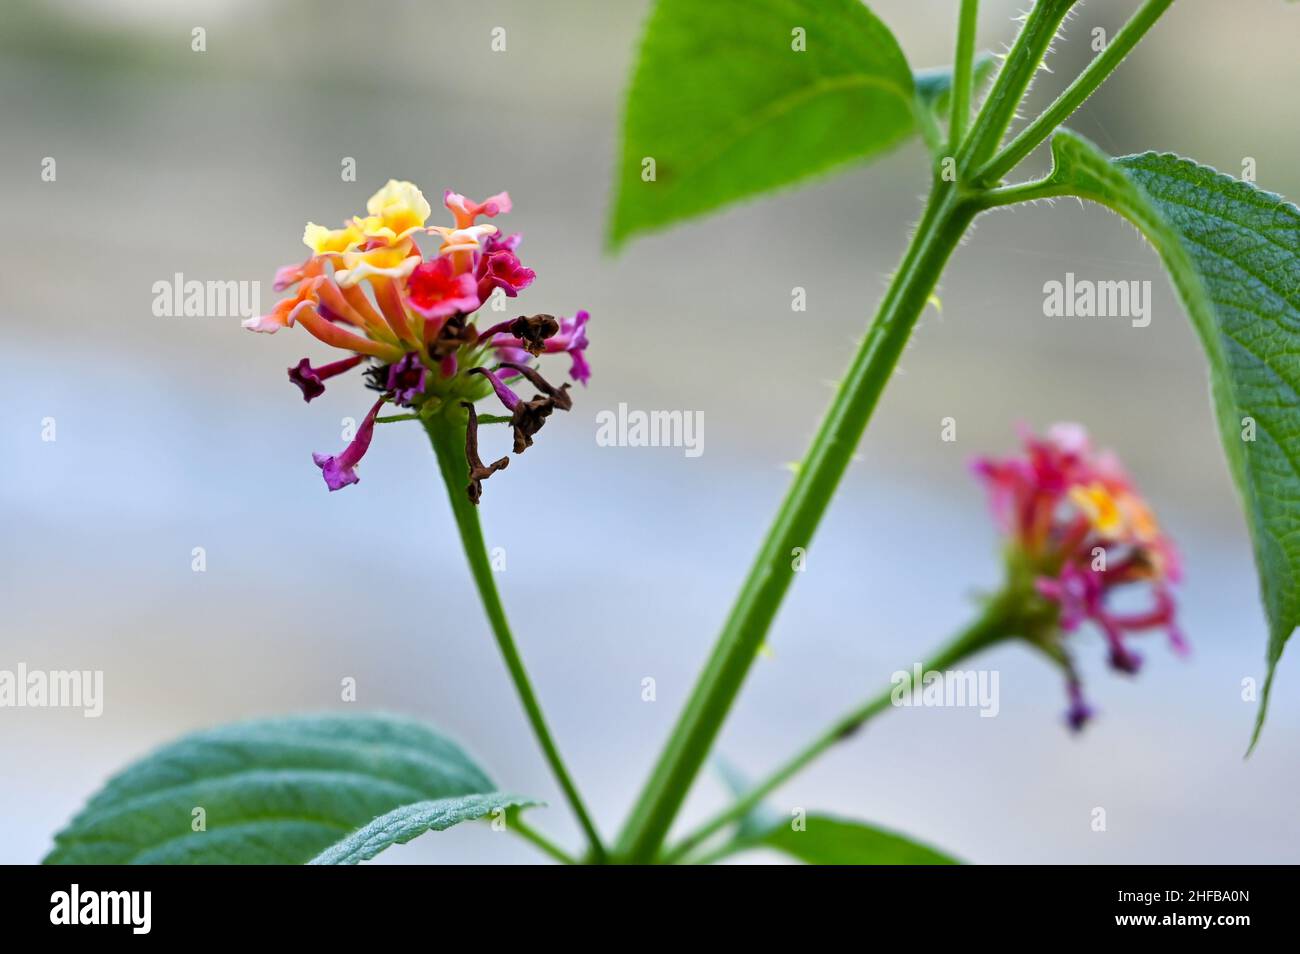 flower images with leaves , blur background . Stock Photo